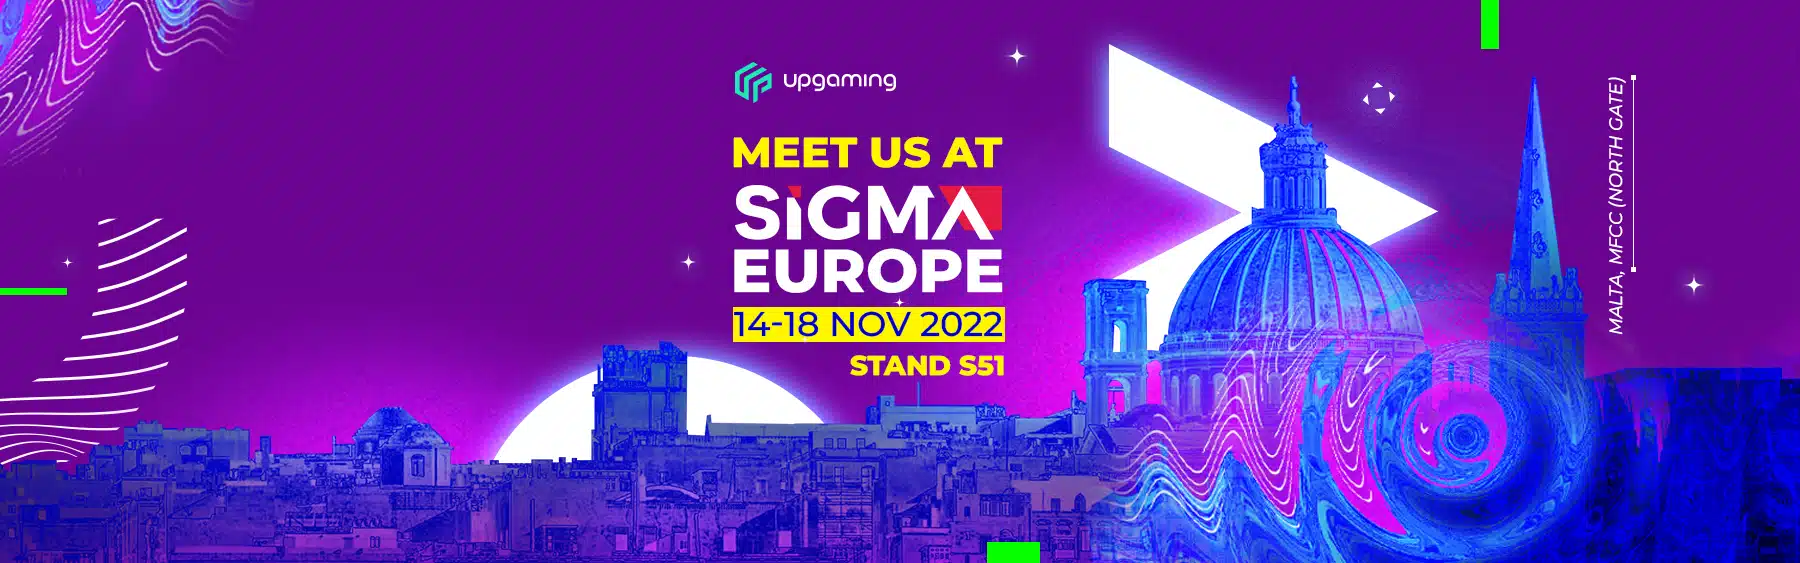 Leading iGaming solutions provider upgaming is attending Sigma europe 2022